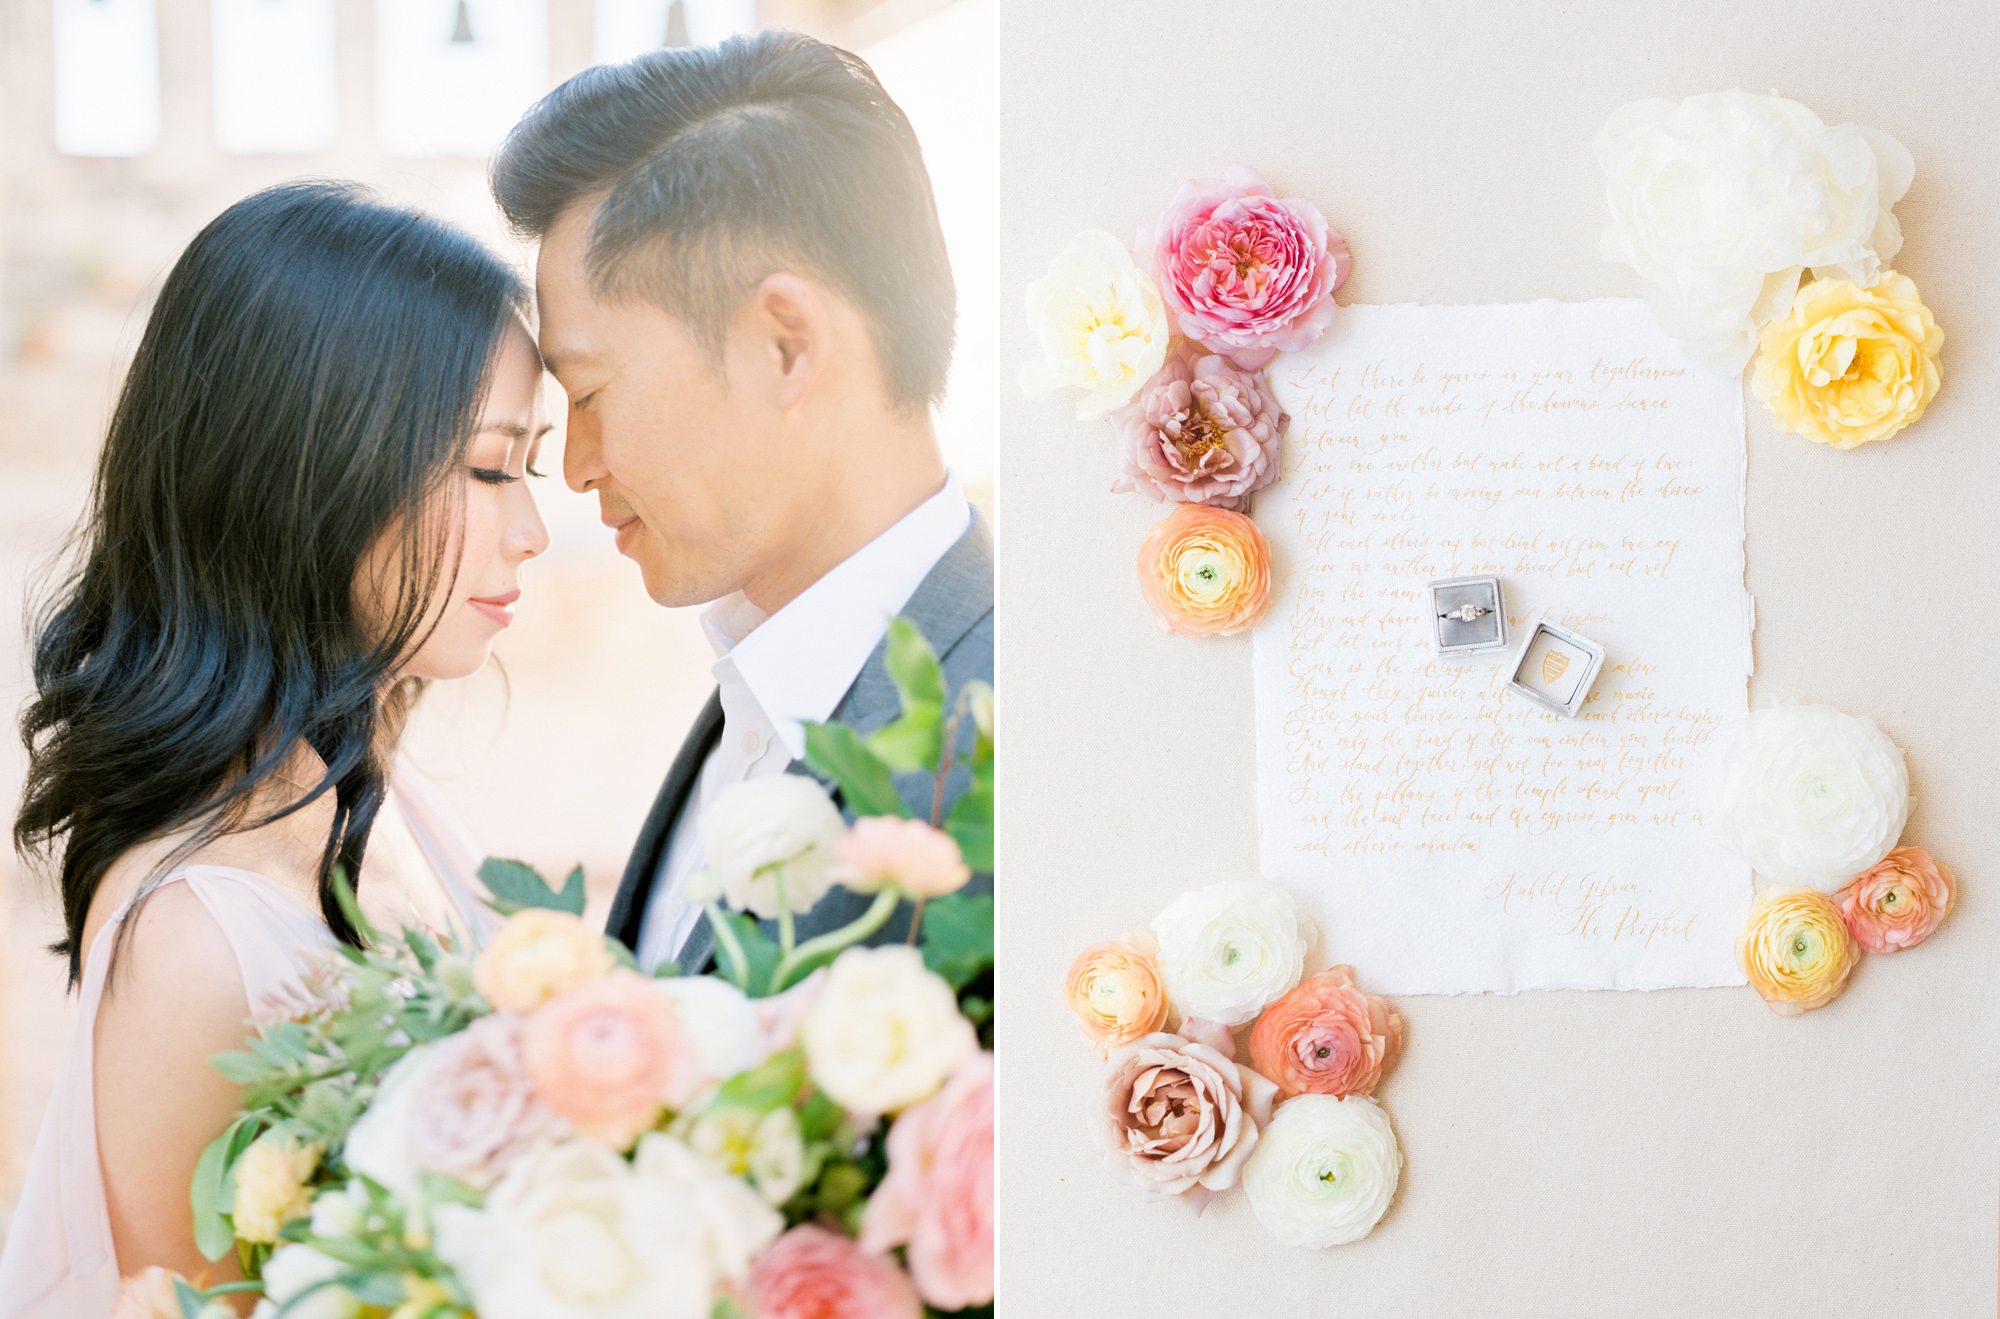 The Mrs Box paired with delicate callligraphy photographed by Santa Barbara wedding photographer Tenth & Grace